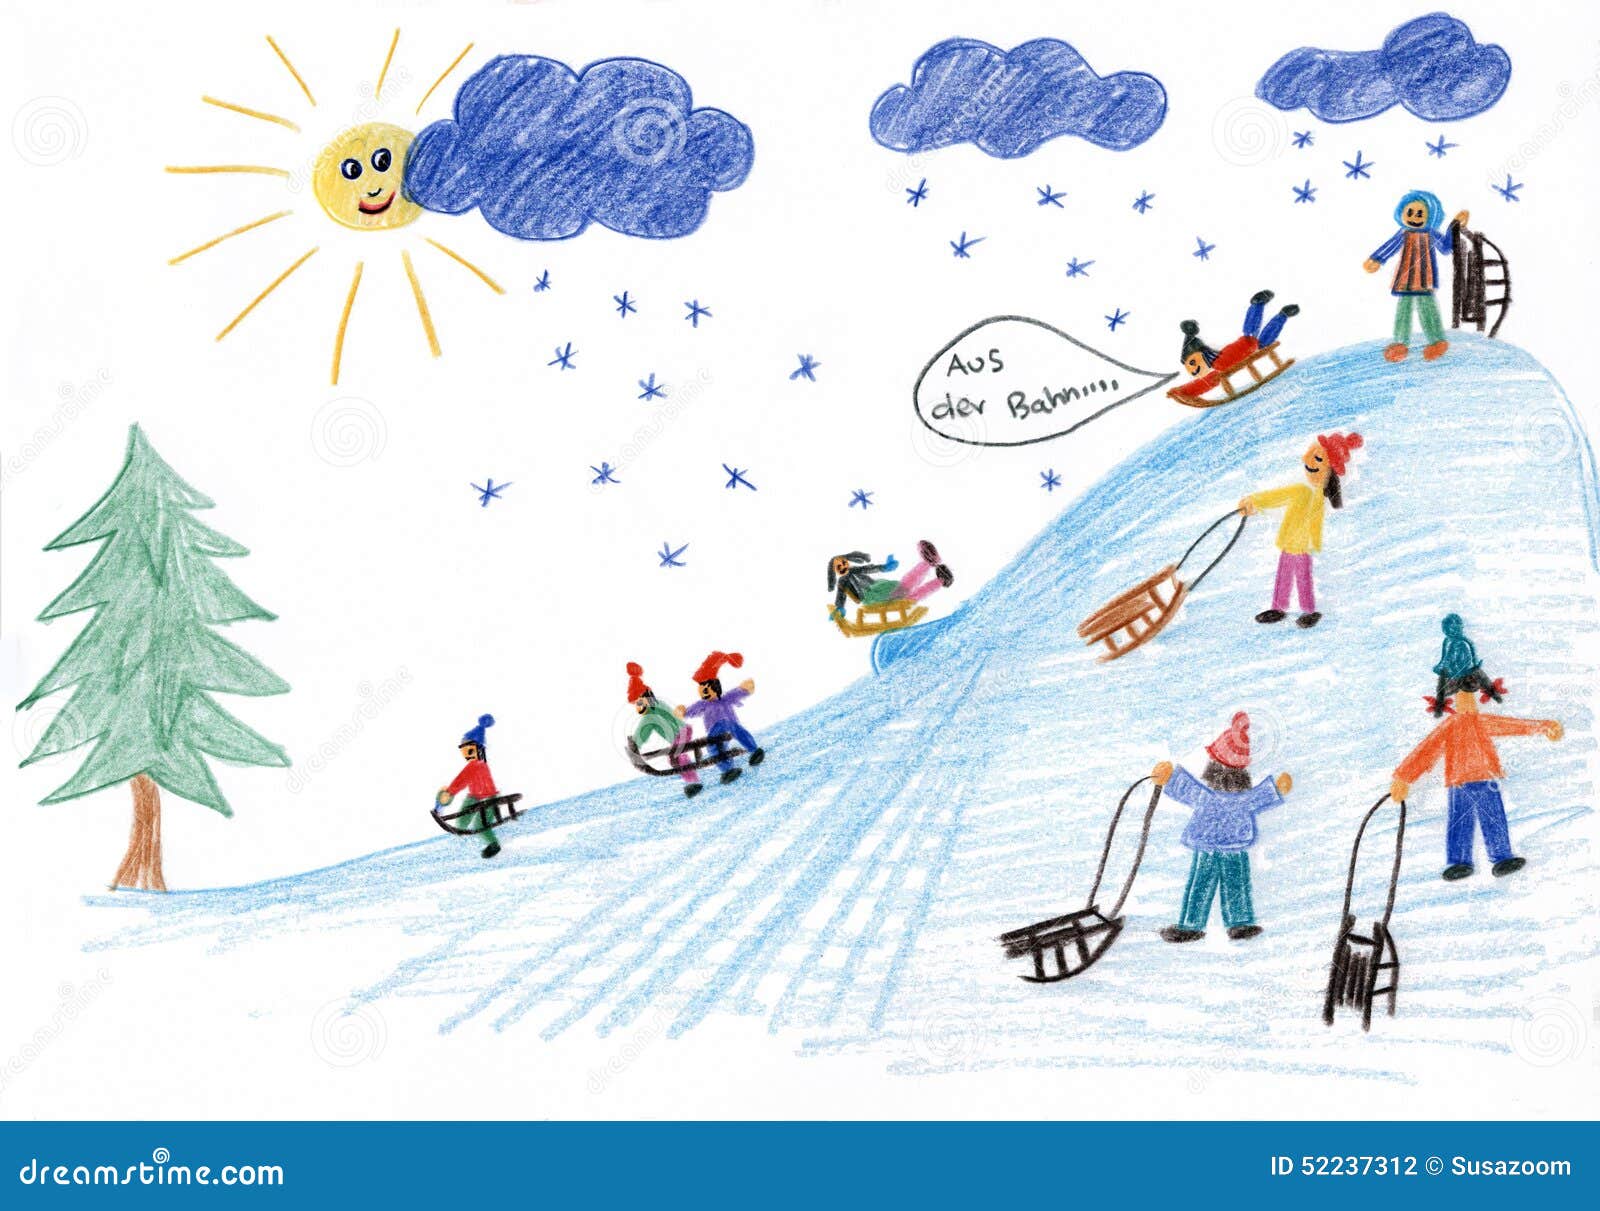 winter vacation clipart - photo #24